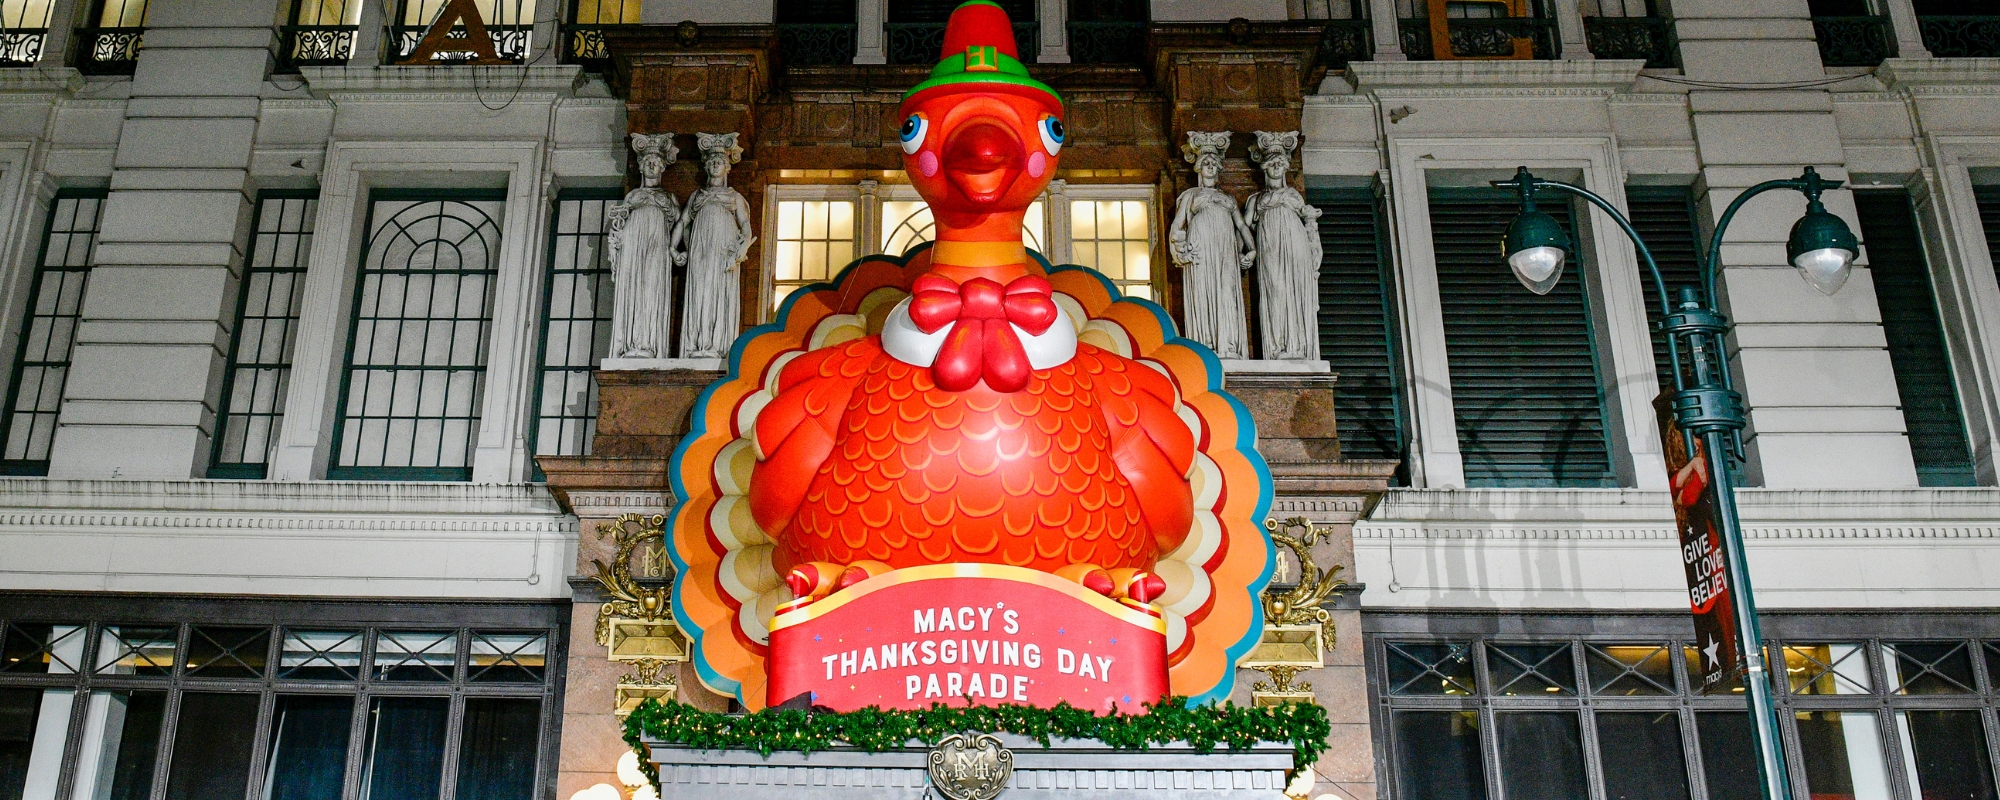 Angry Fans React to Performers Lip Syncing During the Macy’s Thanksgiving Day Parade